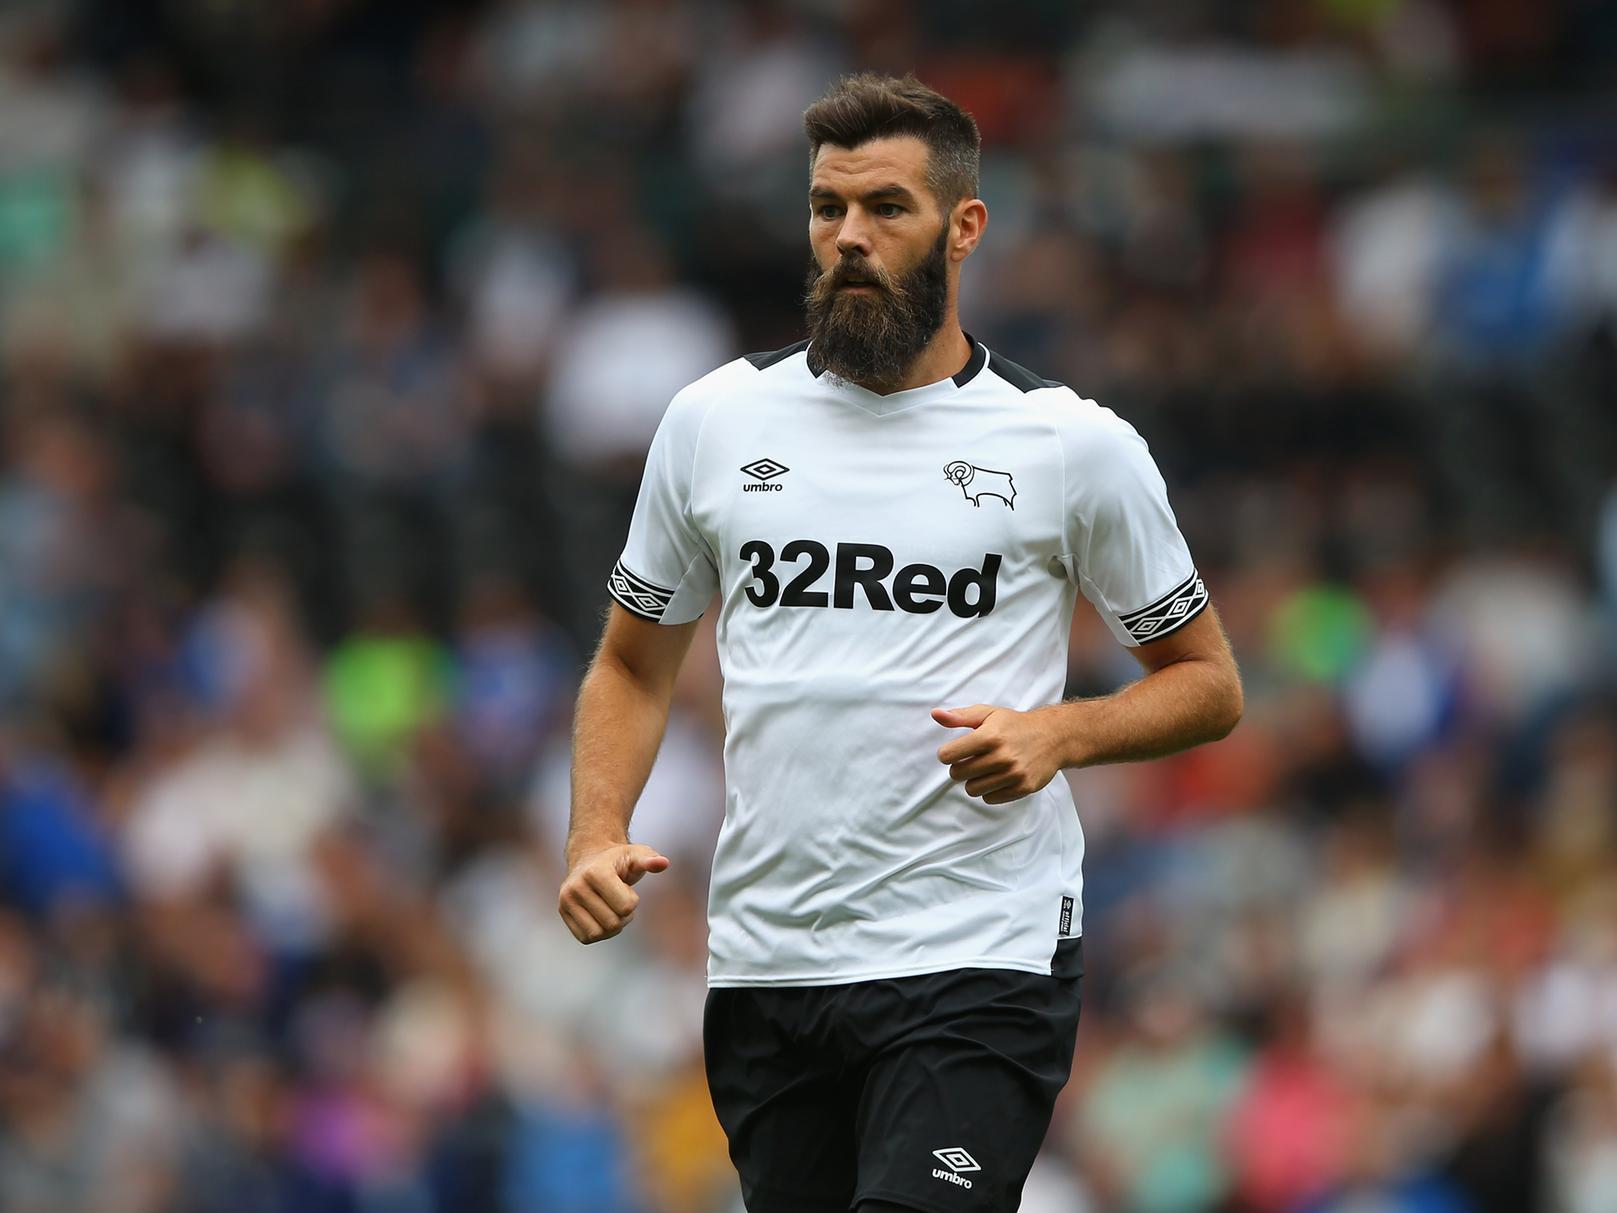 Former Derby County and Celtic midfielder Joe Ledley is believed to have agreed terms with Newcastle Jets ahead of a move to the Australian top tier side. He was released by Charlton last month. (Wales Online)